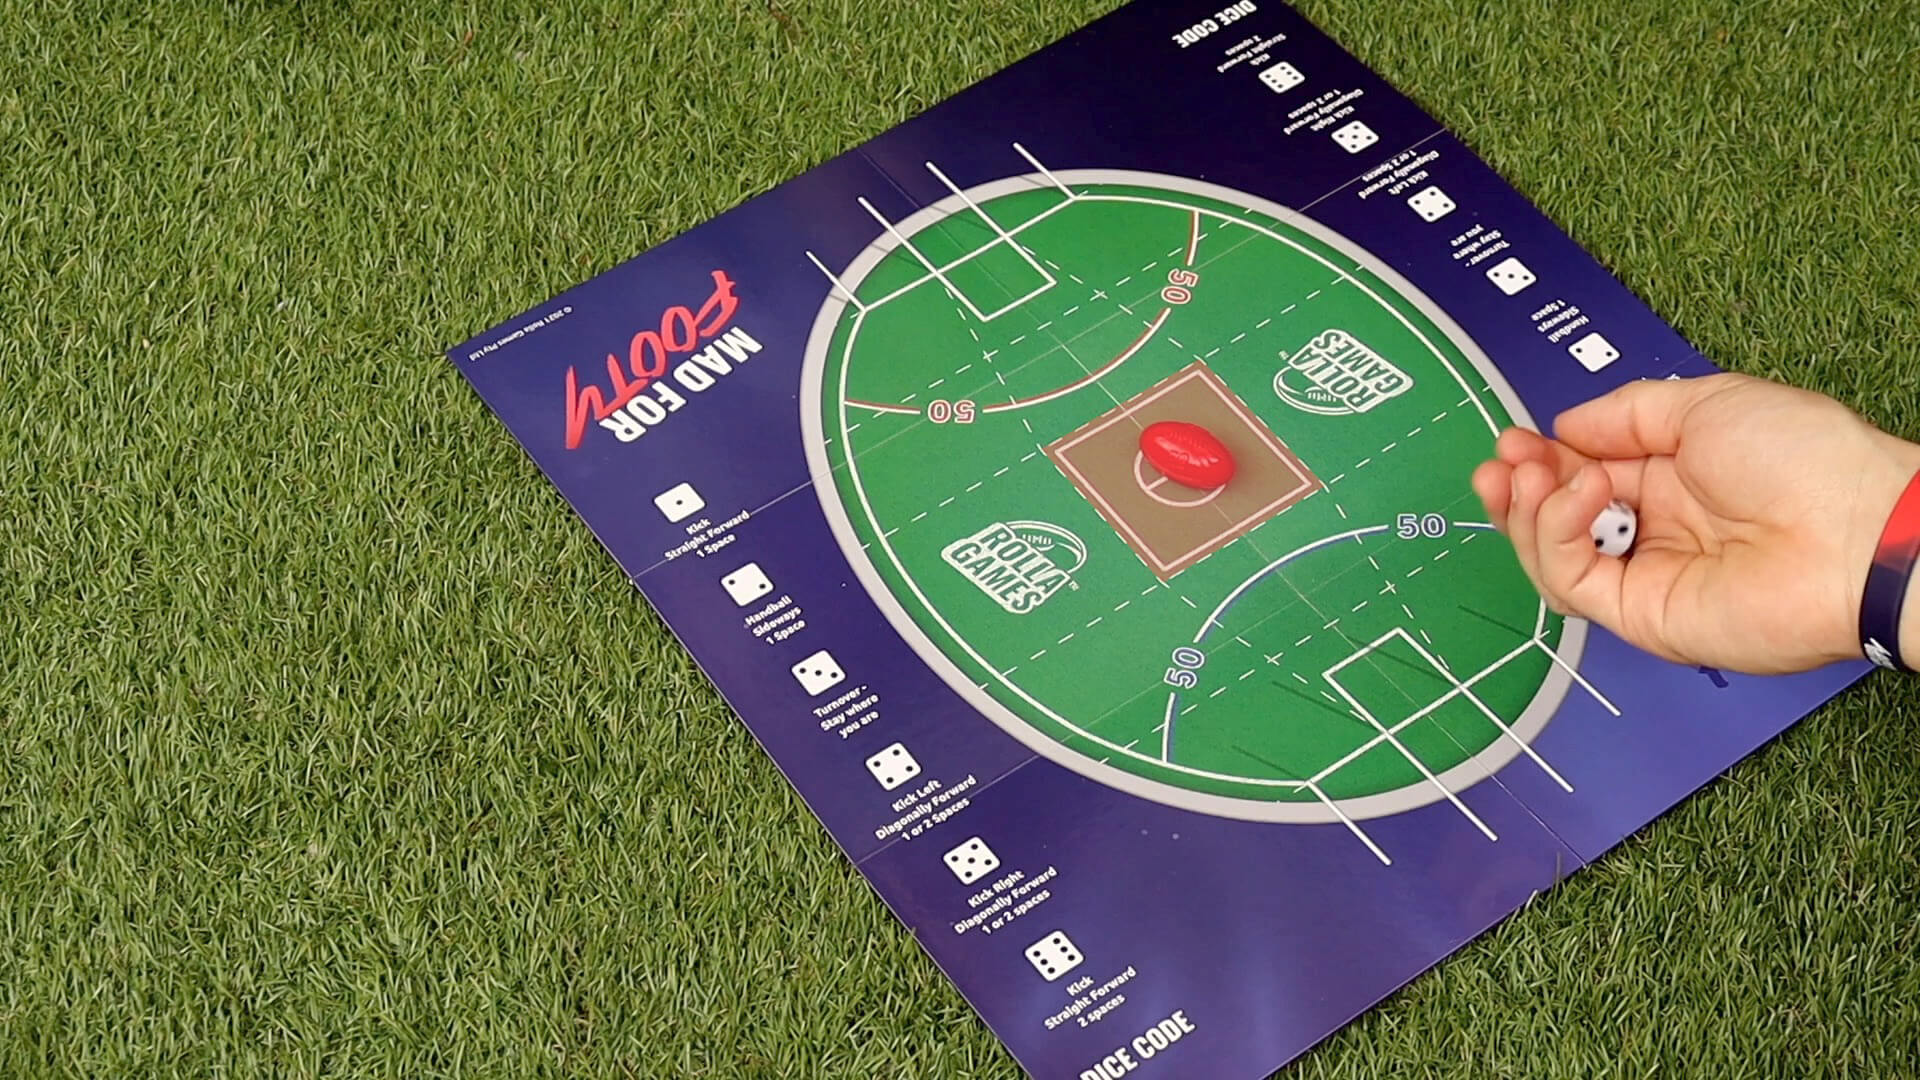 How to start playing Mad for Footy AFL board game.